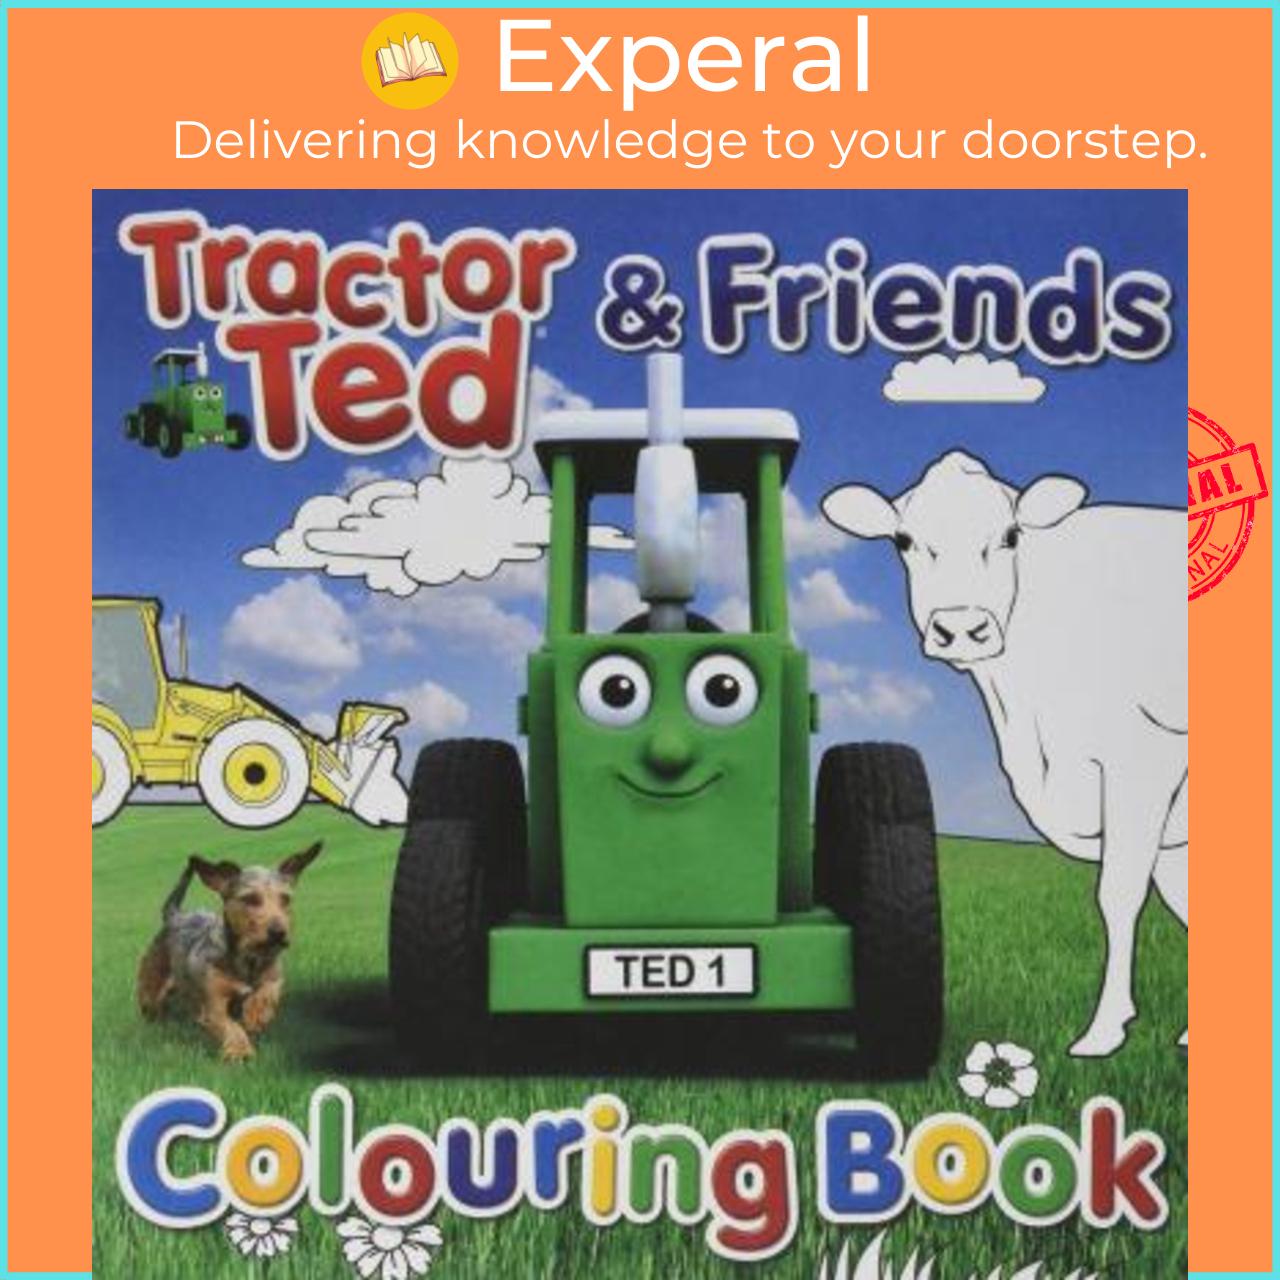 Sách - Tractor Ted Colouring Book by Alexandra Heard (UK edition, paperback)